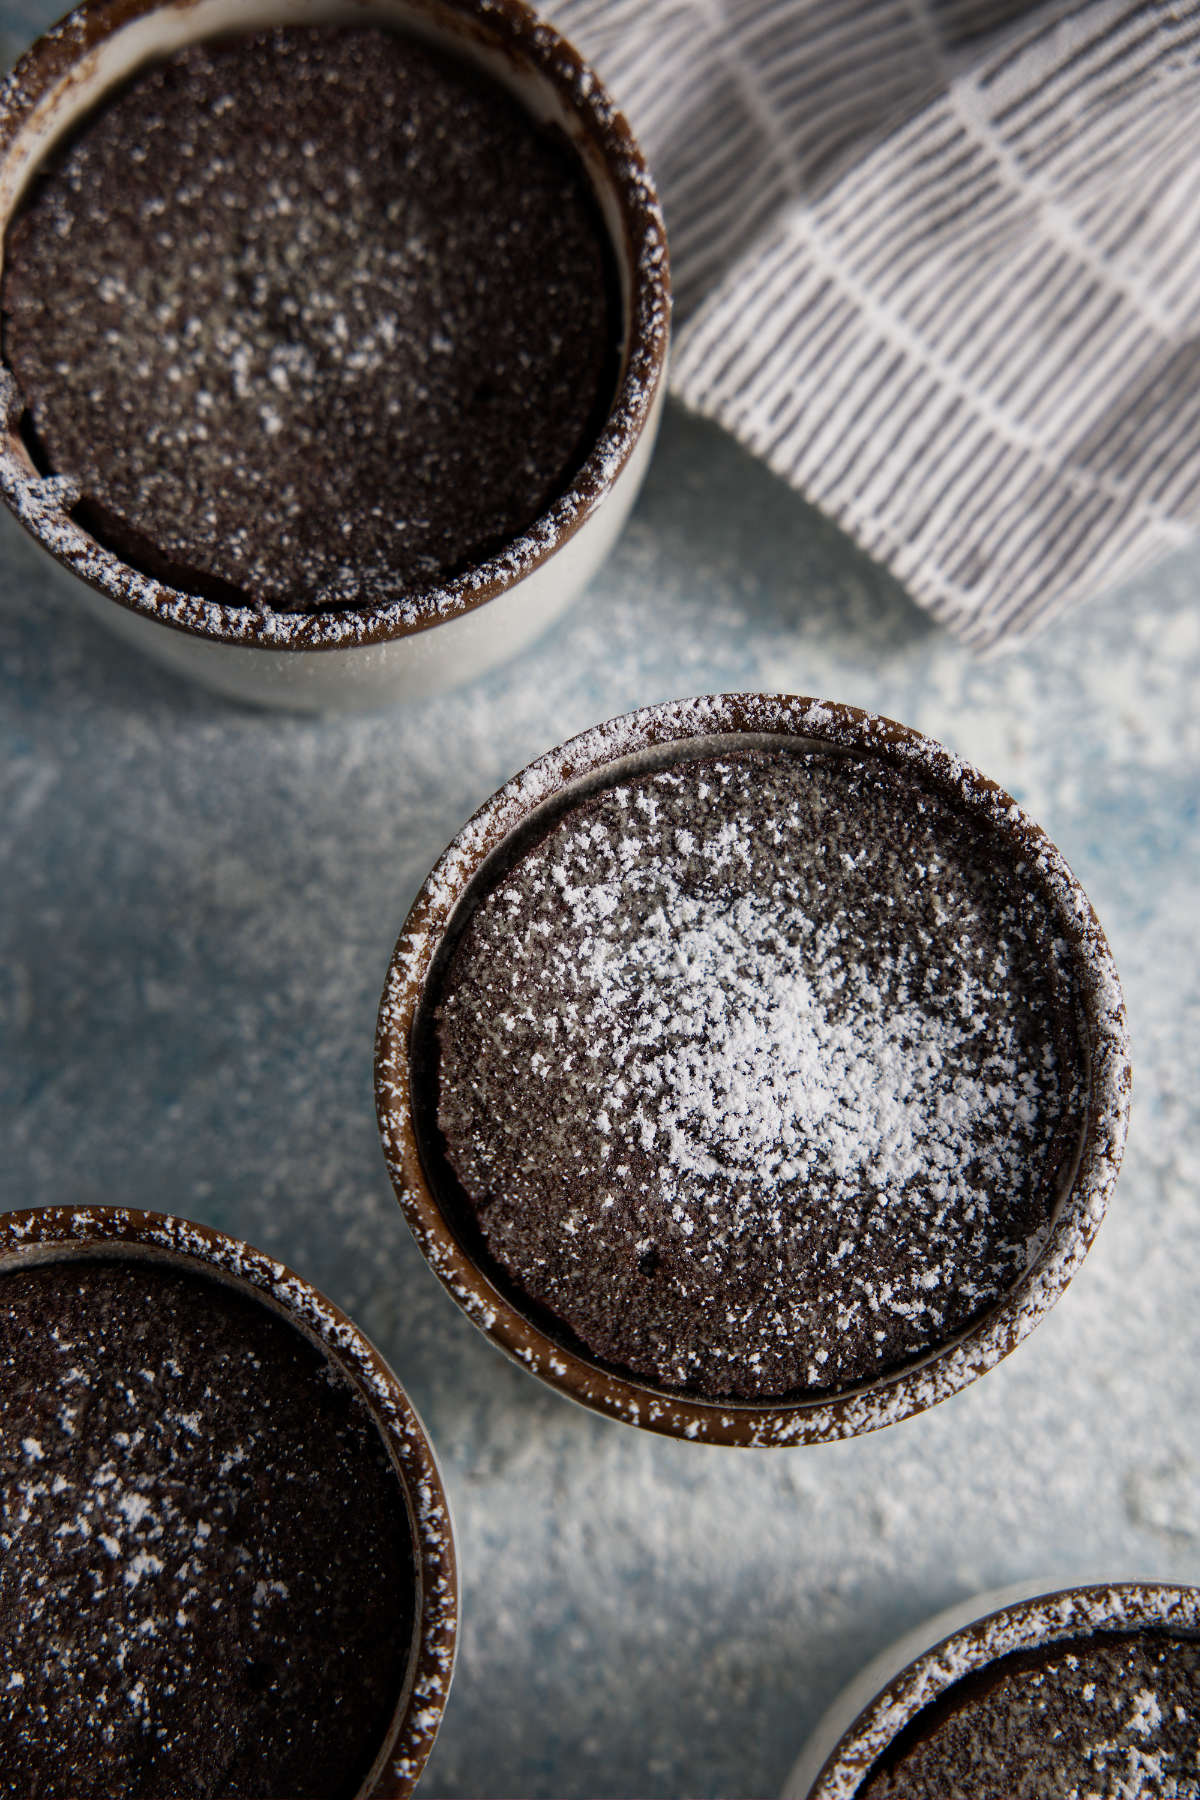 Air fryer mug cakes dusted with powdered sugar.